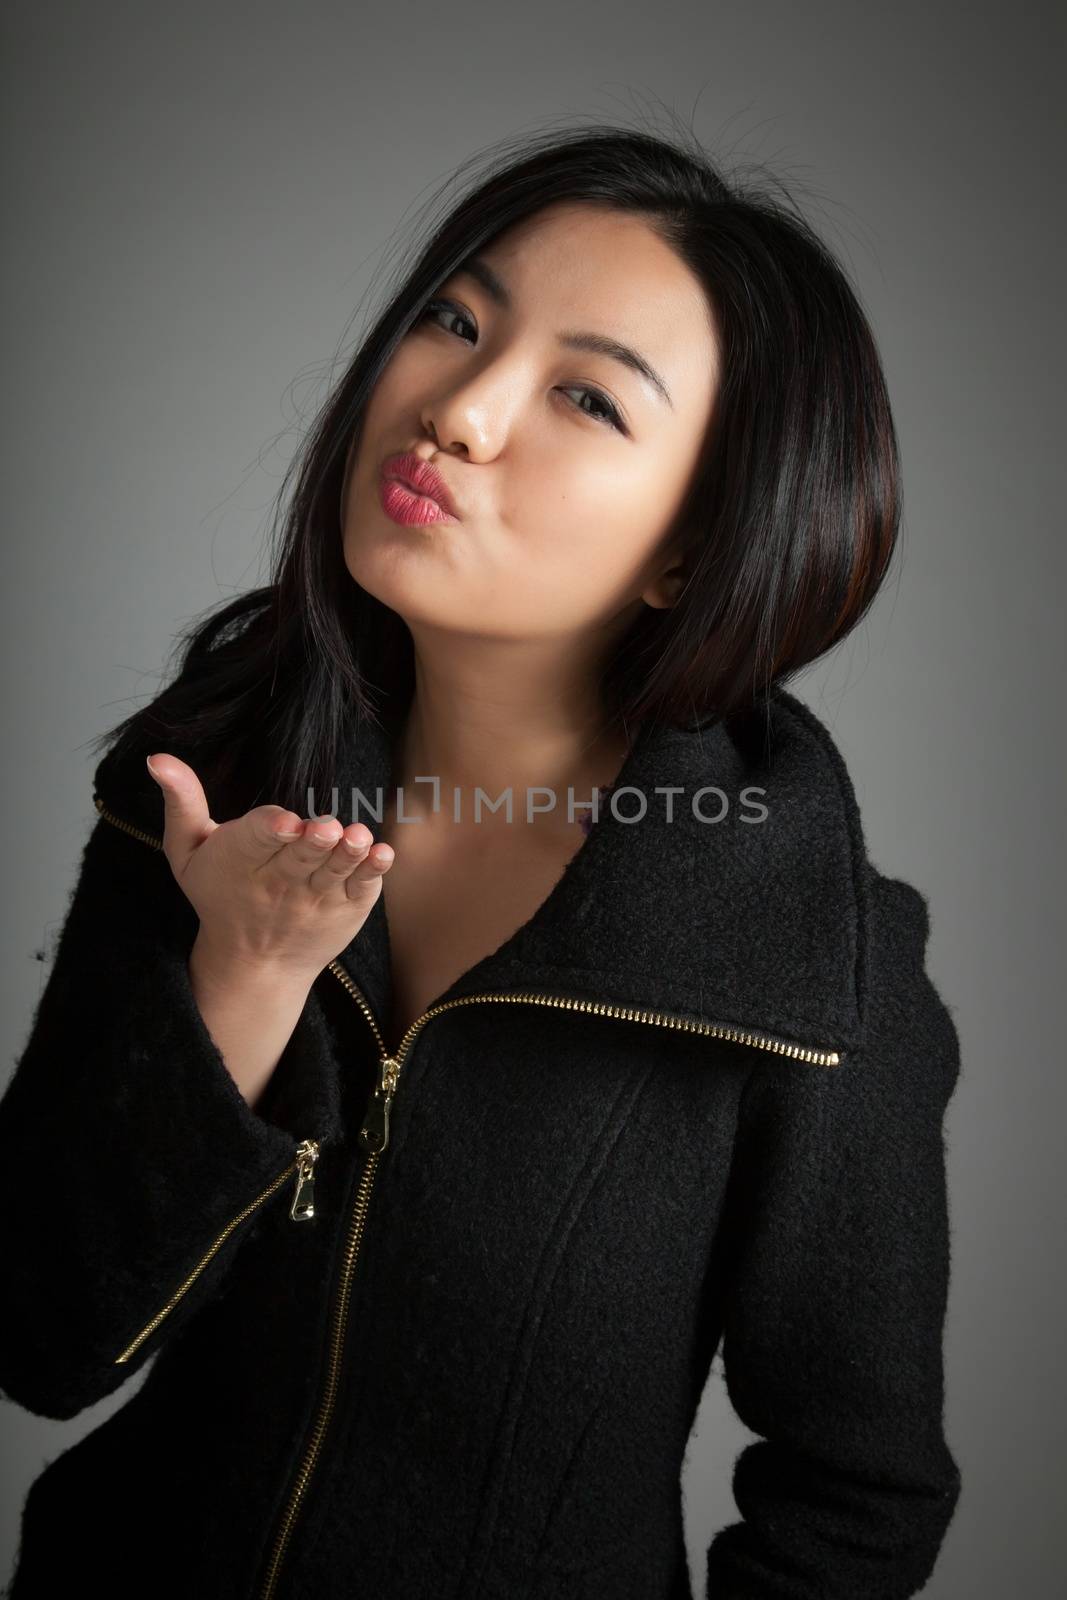 Attractive asian girl in her twenties isolated on a plein background shot in a studio